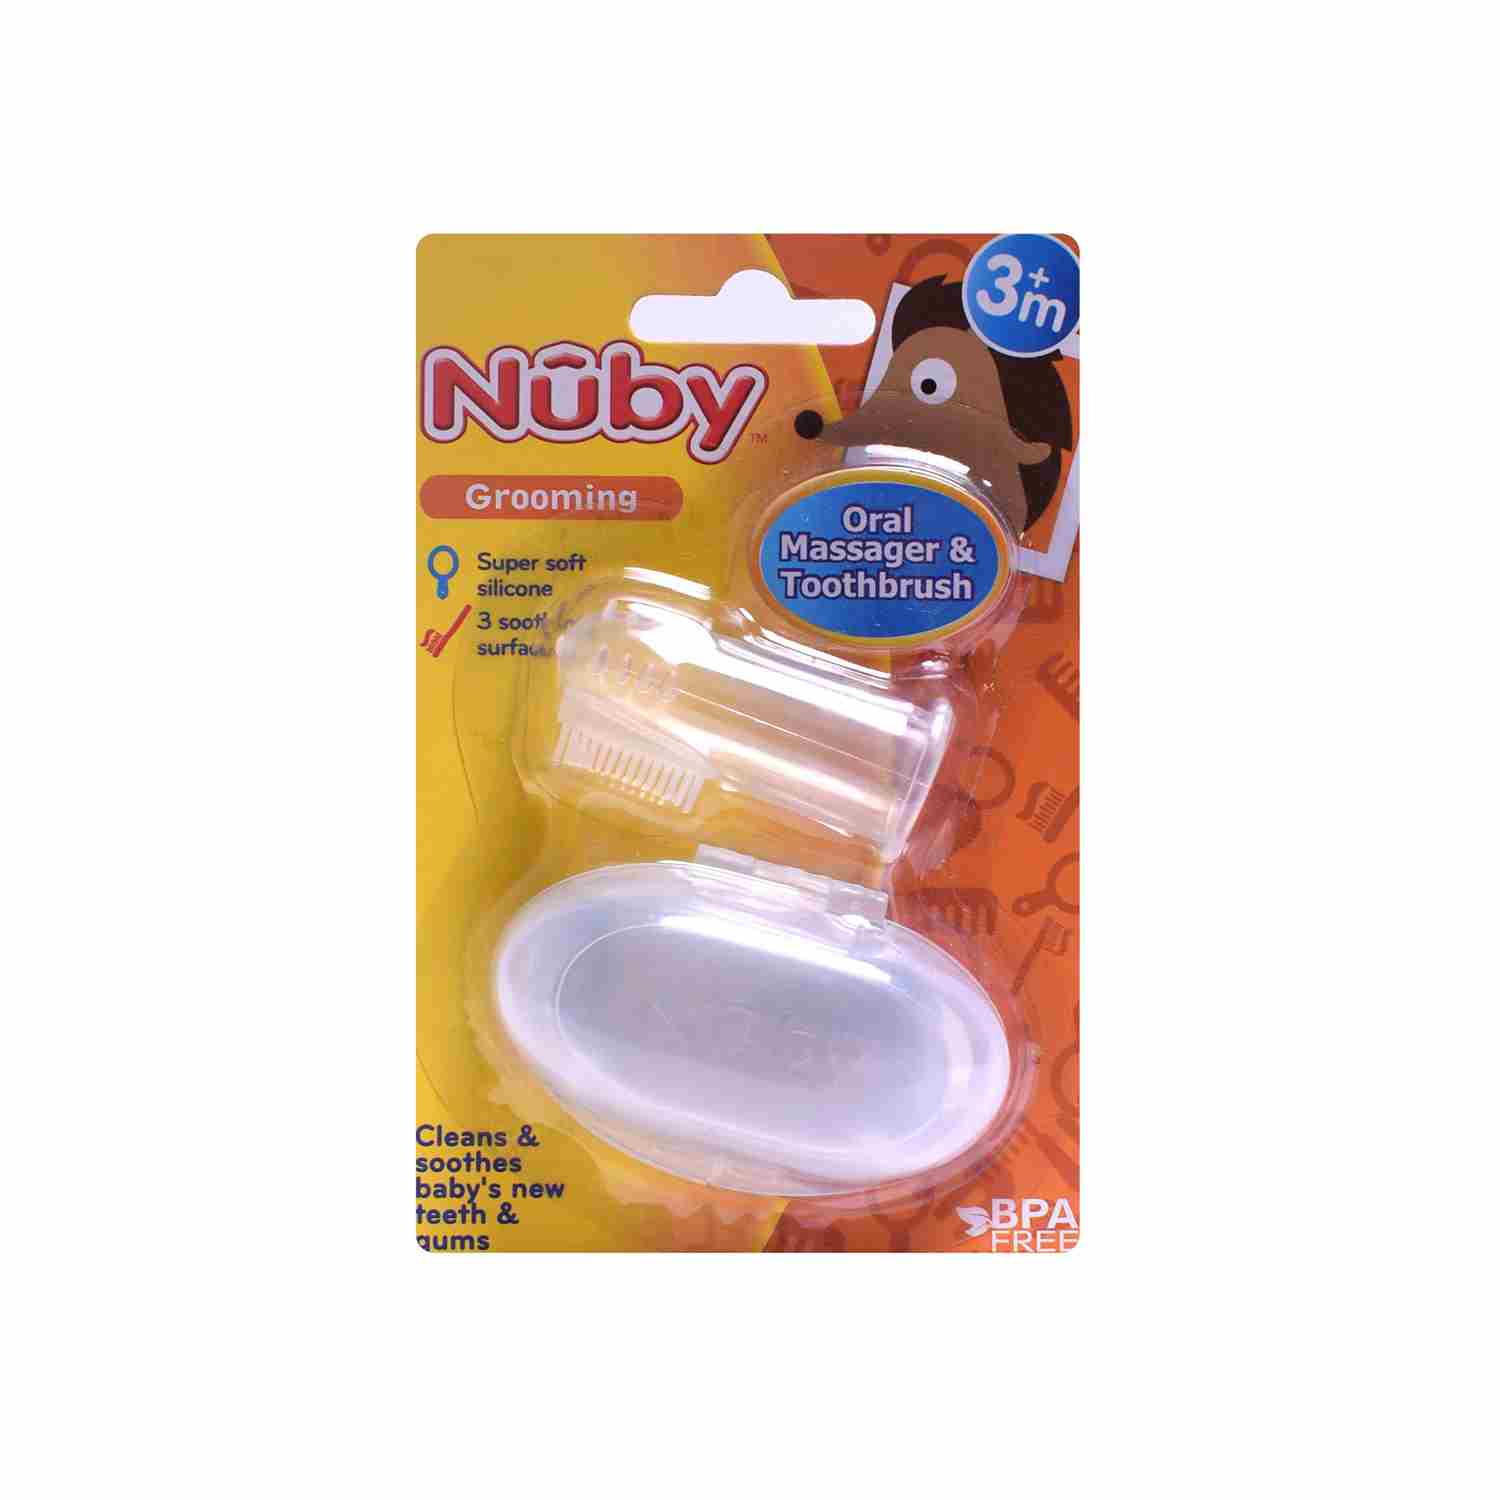 NUBY Soft silicon oral massager & tooth brush with storage case - 3+m